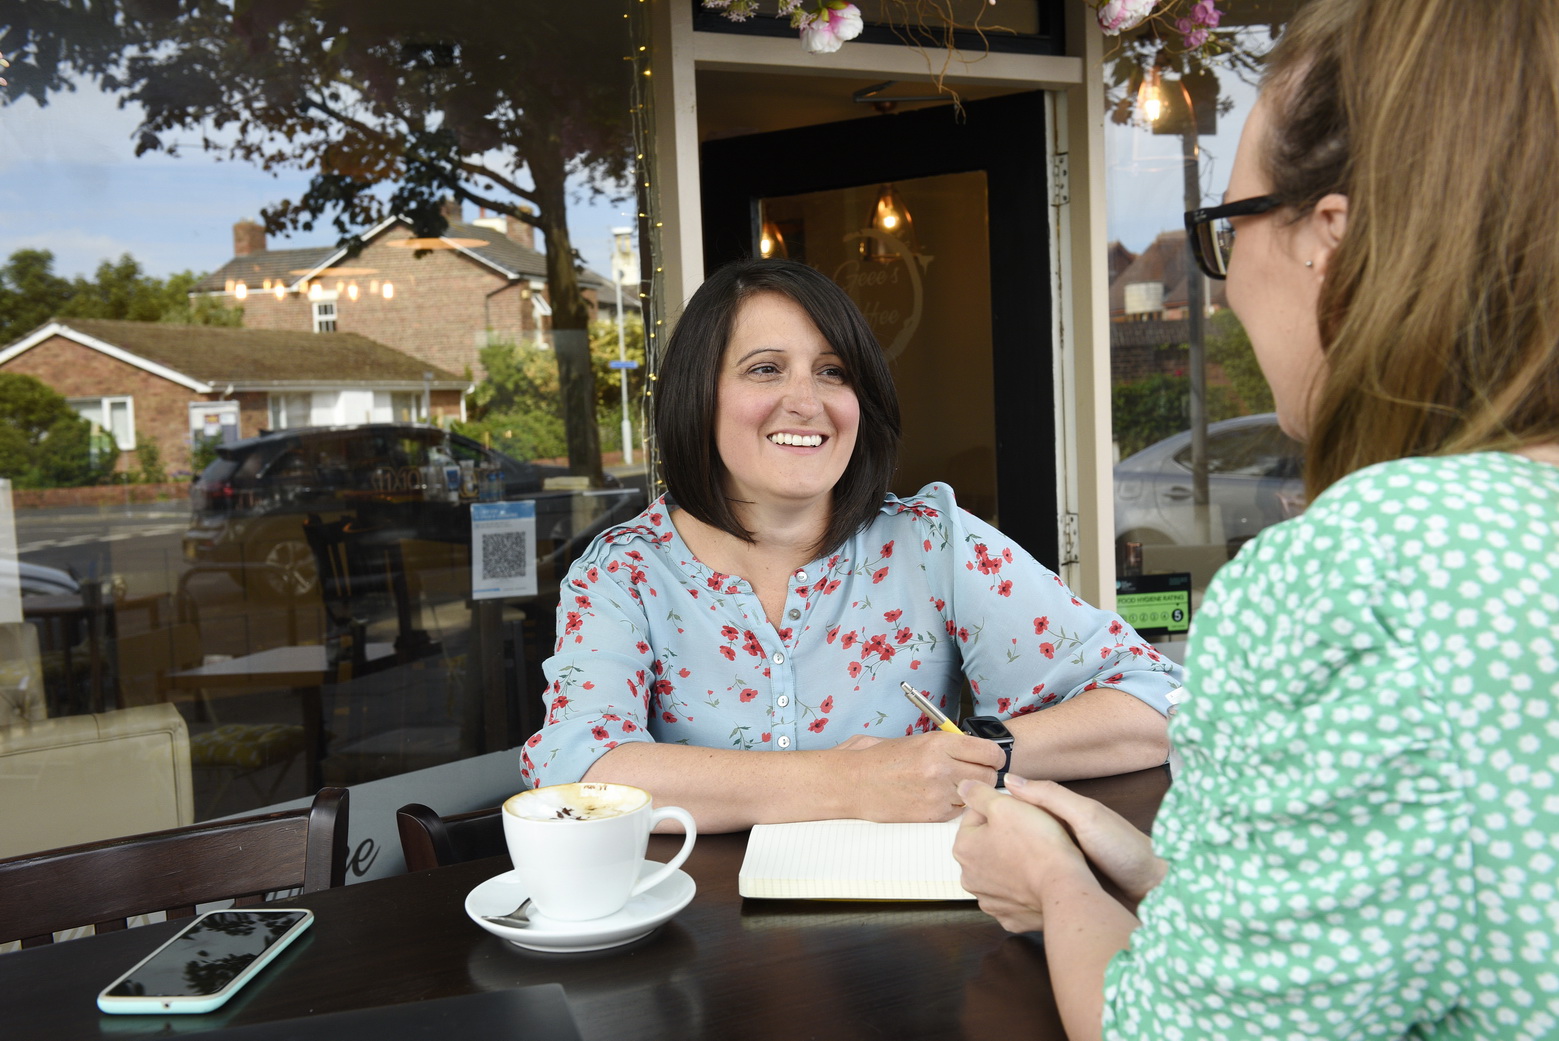 An image showing two people meeting up in a cafe for a business meeting